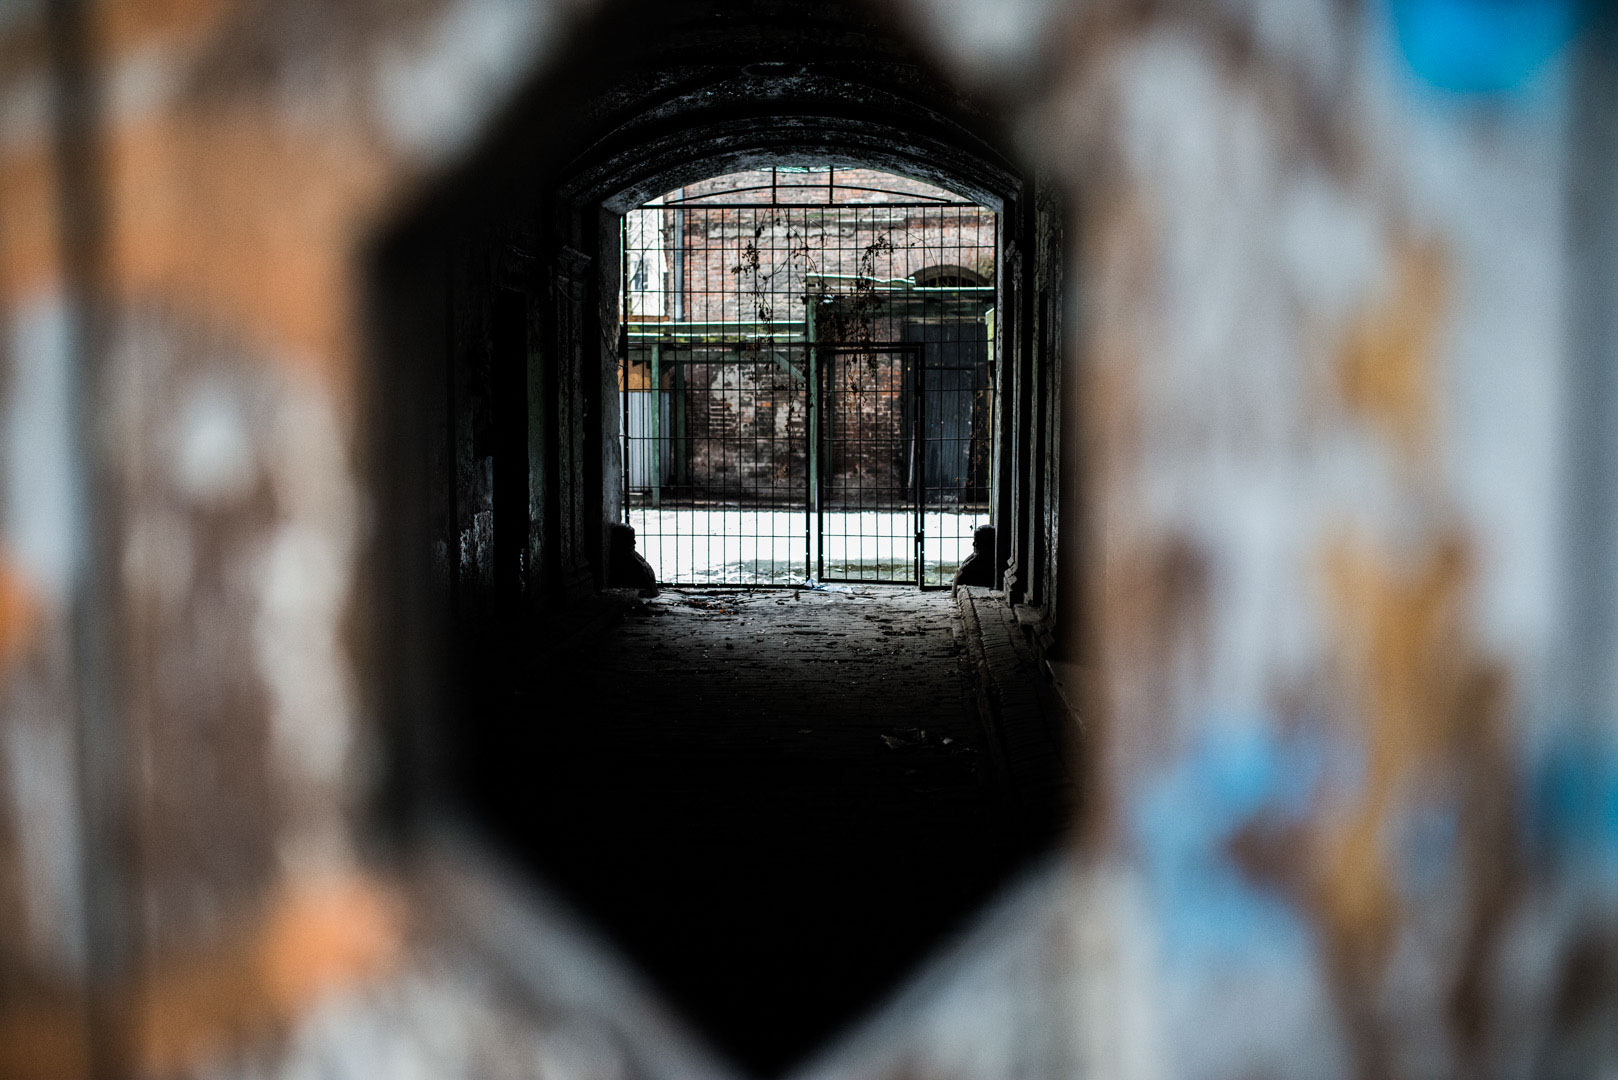 Gate visible through the hole, Streets, london photography, street photographers, tempest photography, tumblr photography, photography